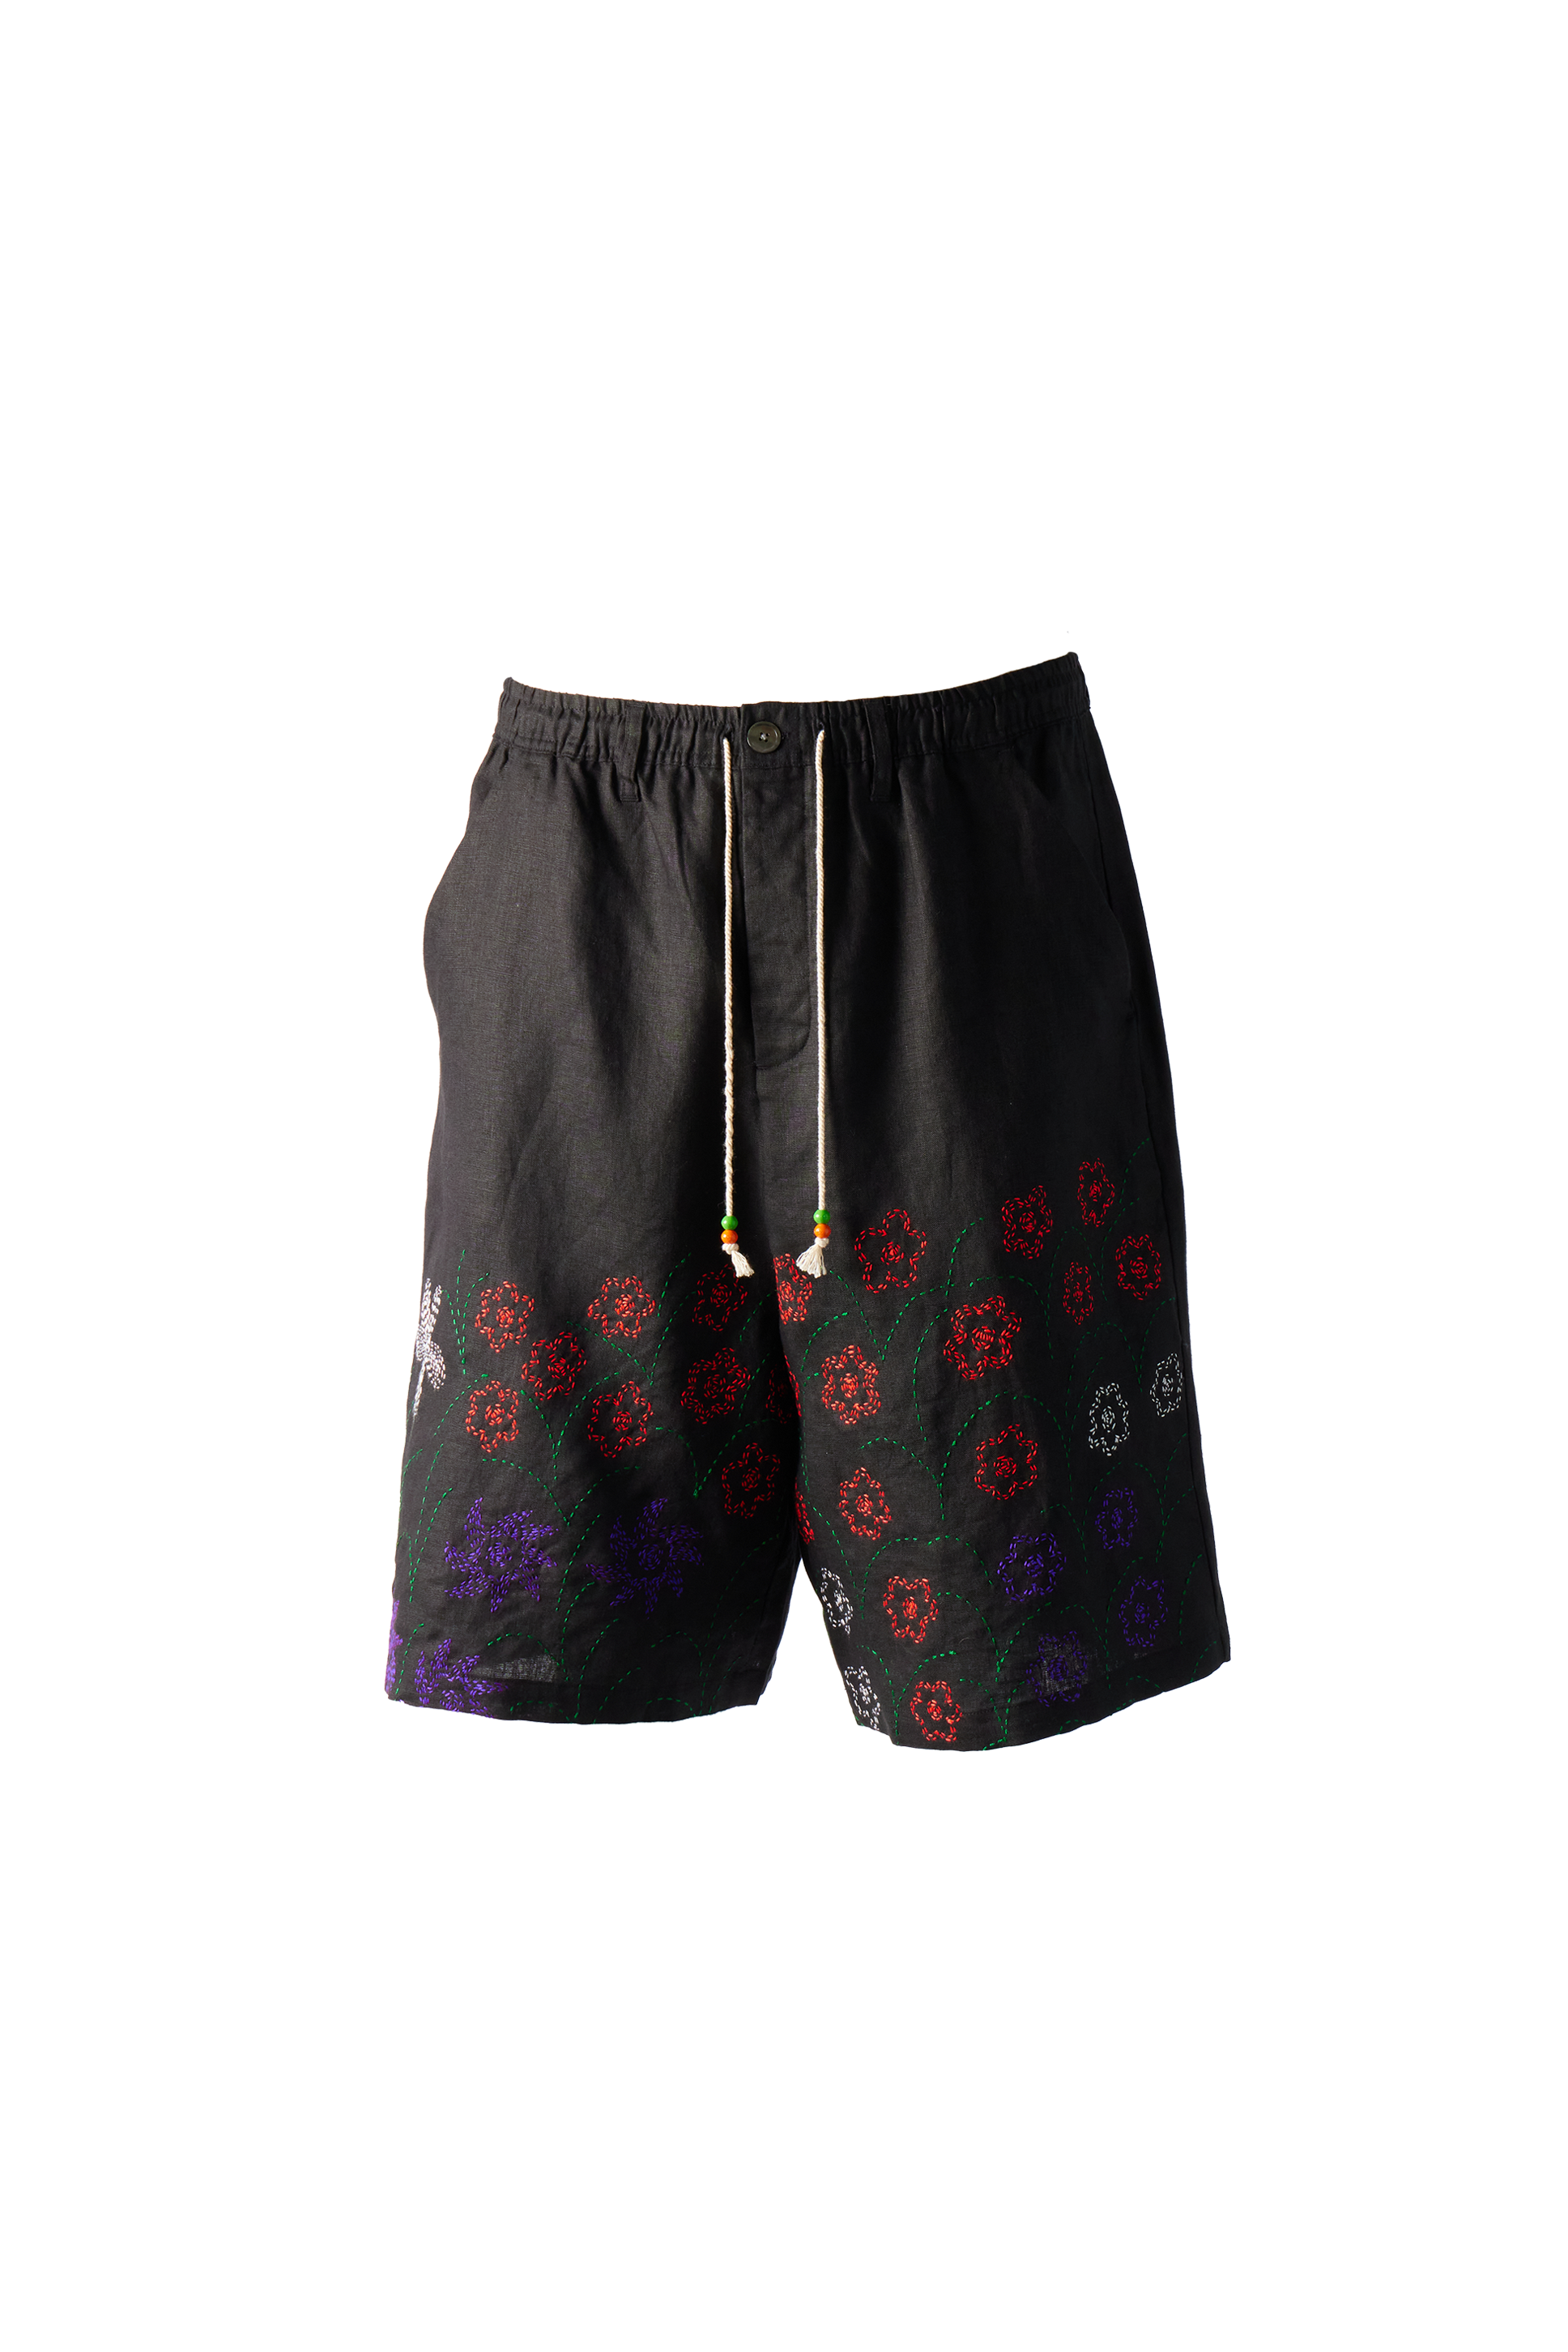 GLASS CYPRESS - Black Linen Shorts product image